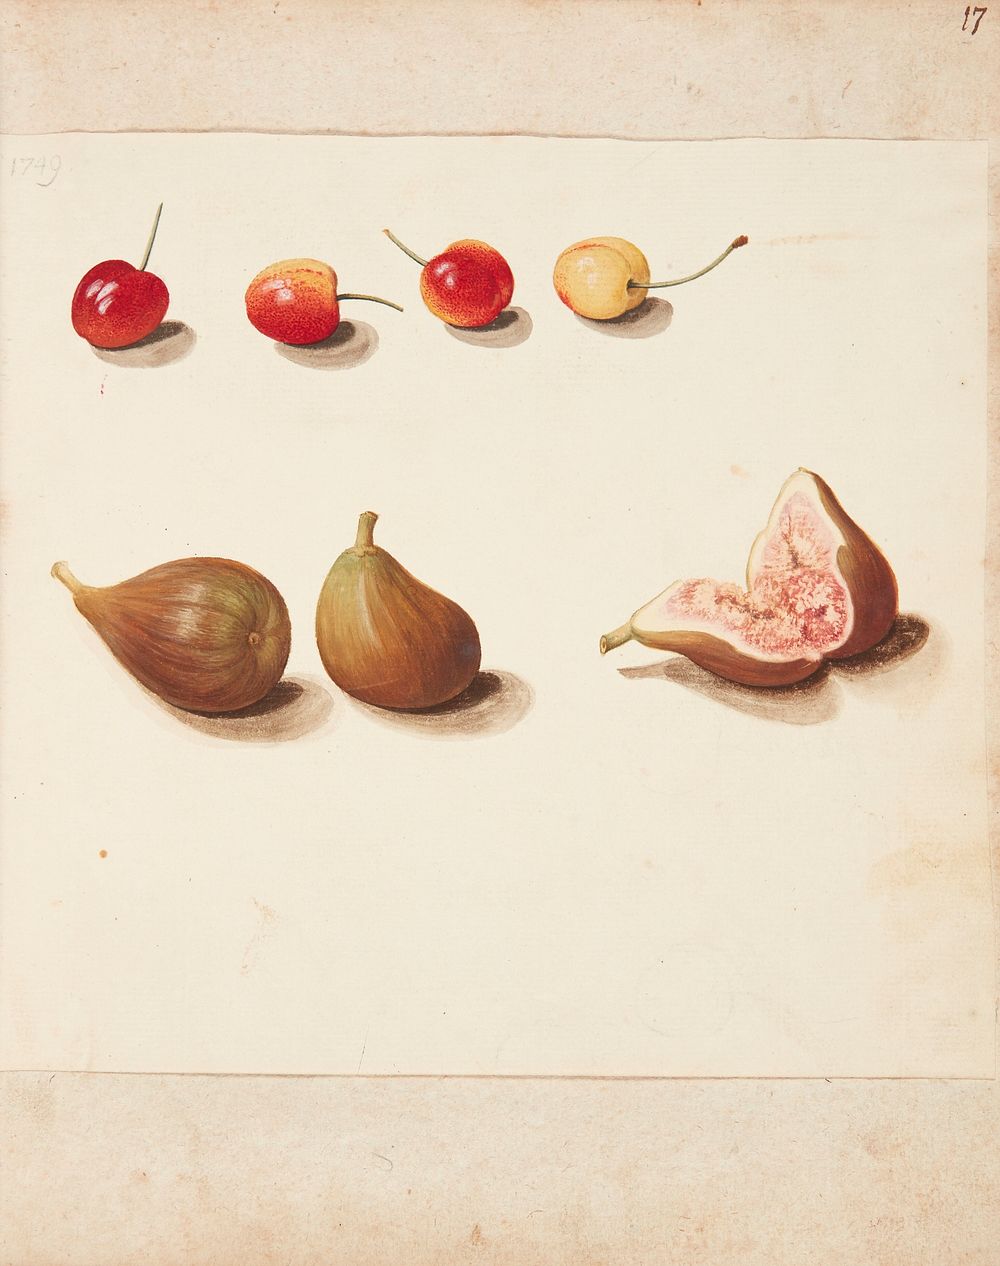 Study of morels and figs by Johanna Fosie